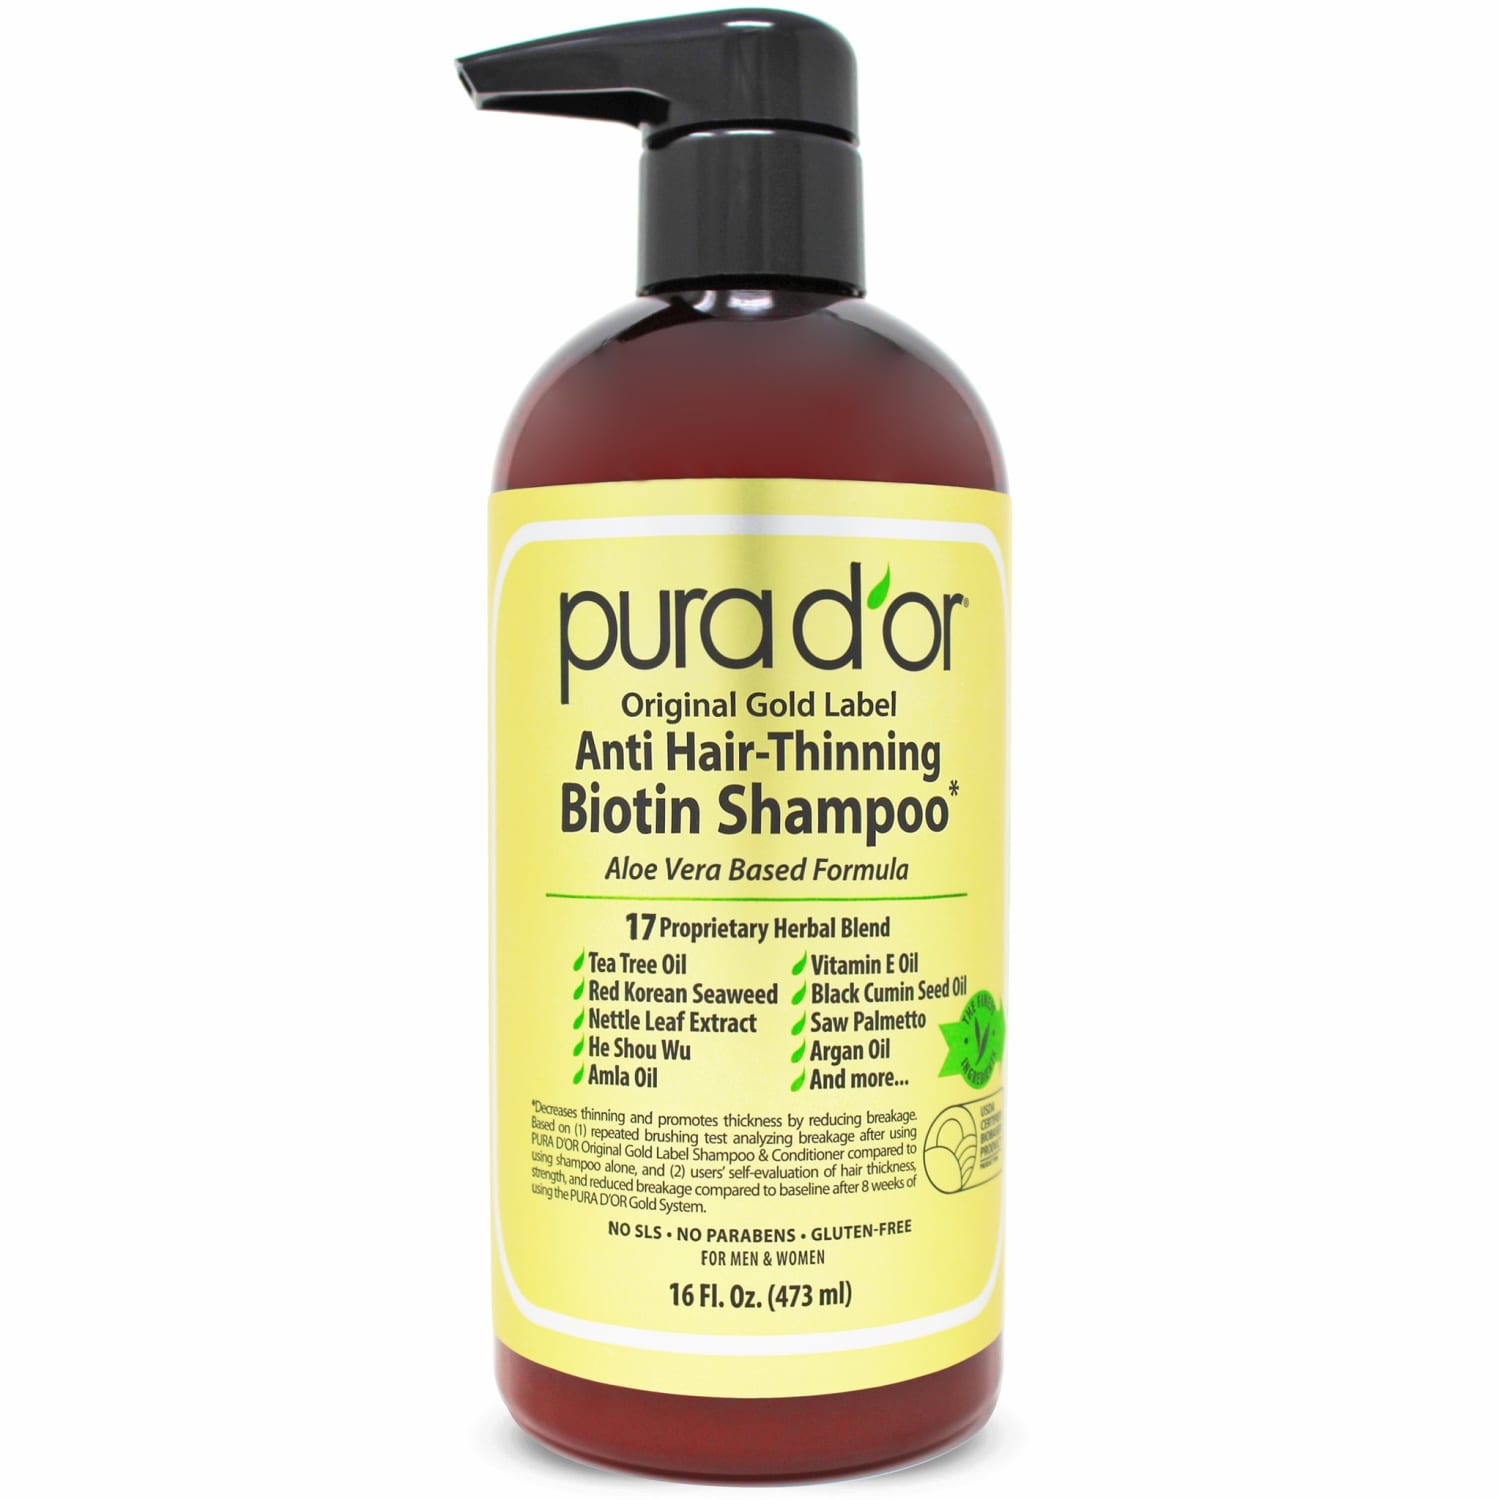 PURA D'OR M.D. Anti Hair-Thinning Shampoo and Conditioner Set